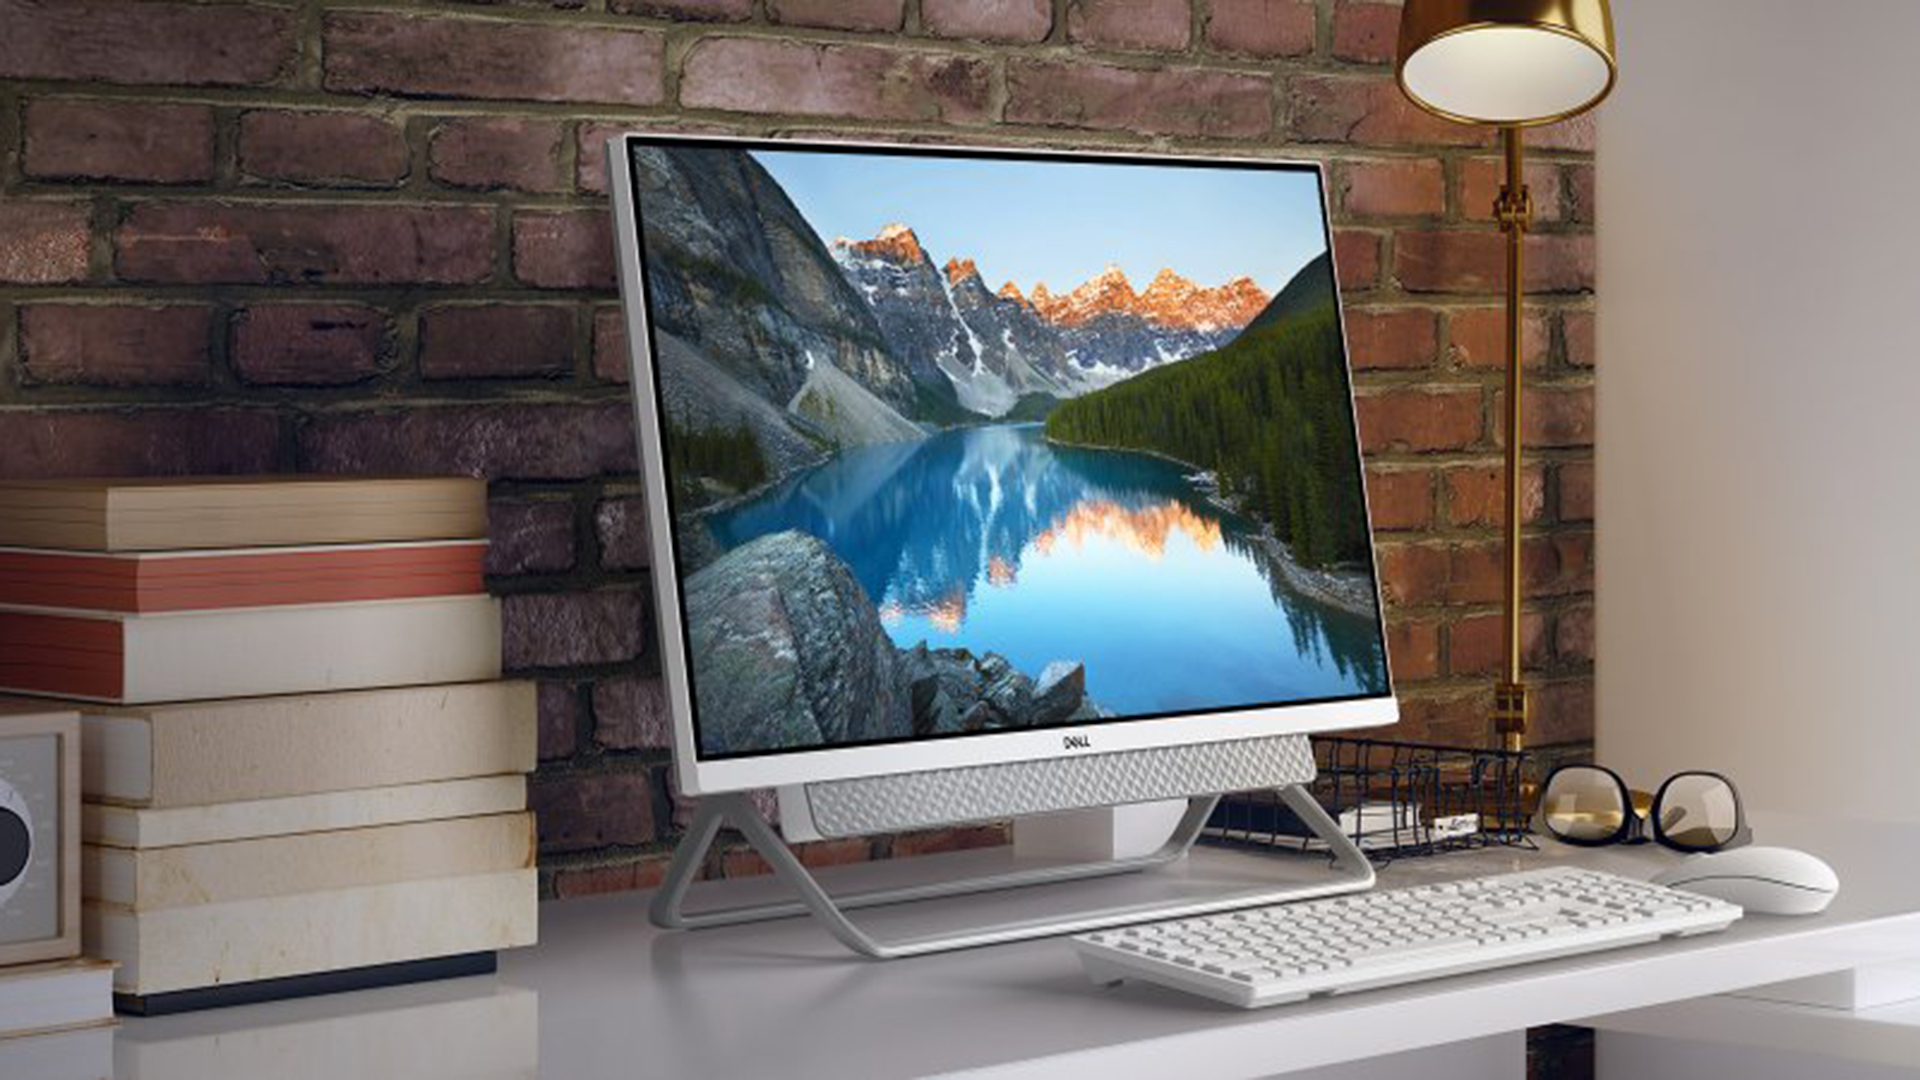 Dell Inspiron 27-7790 | Tech & Learning